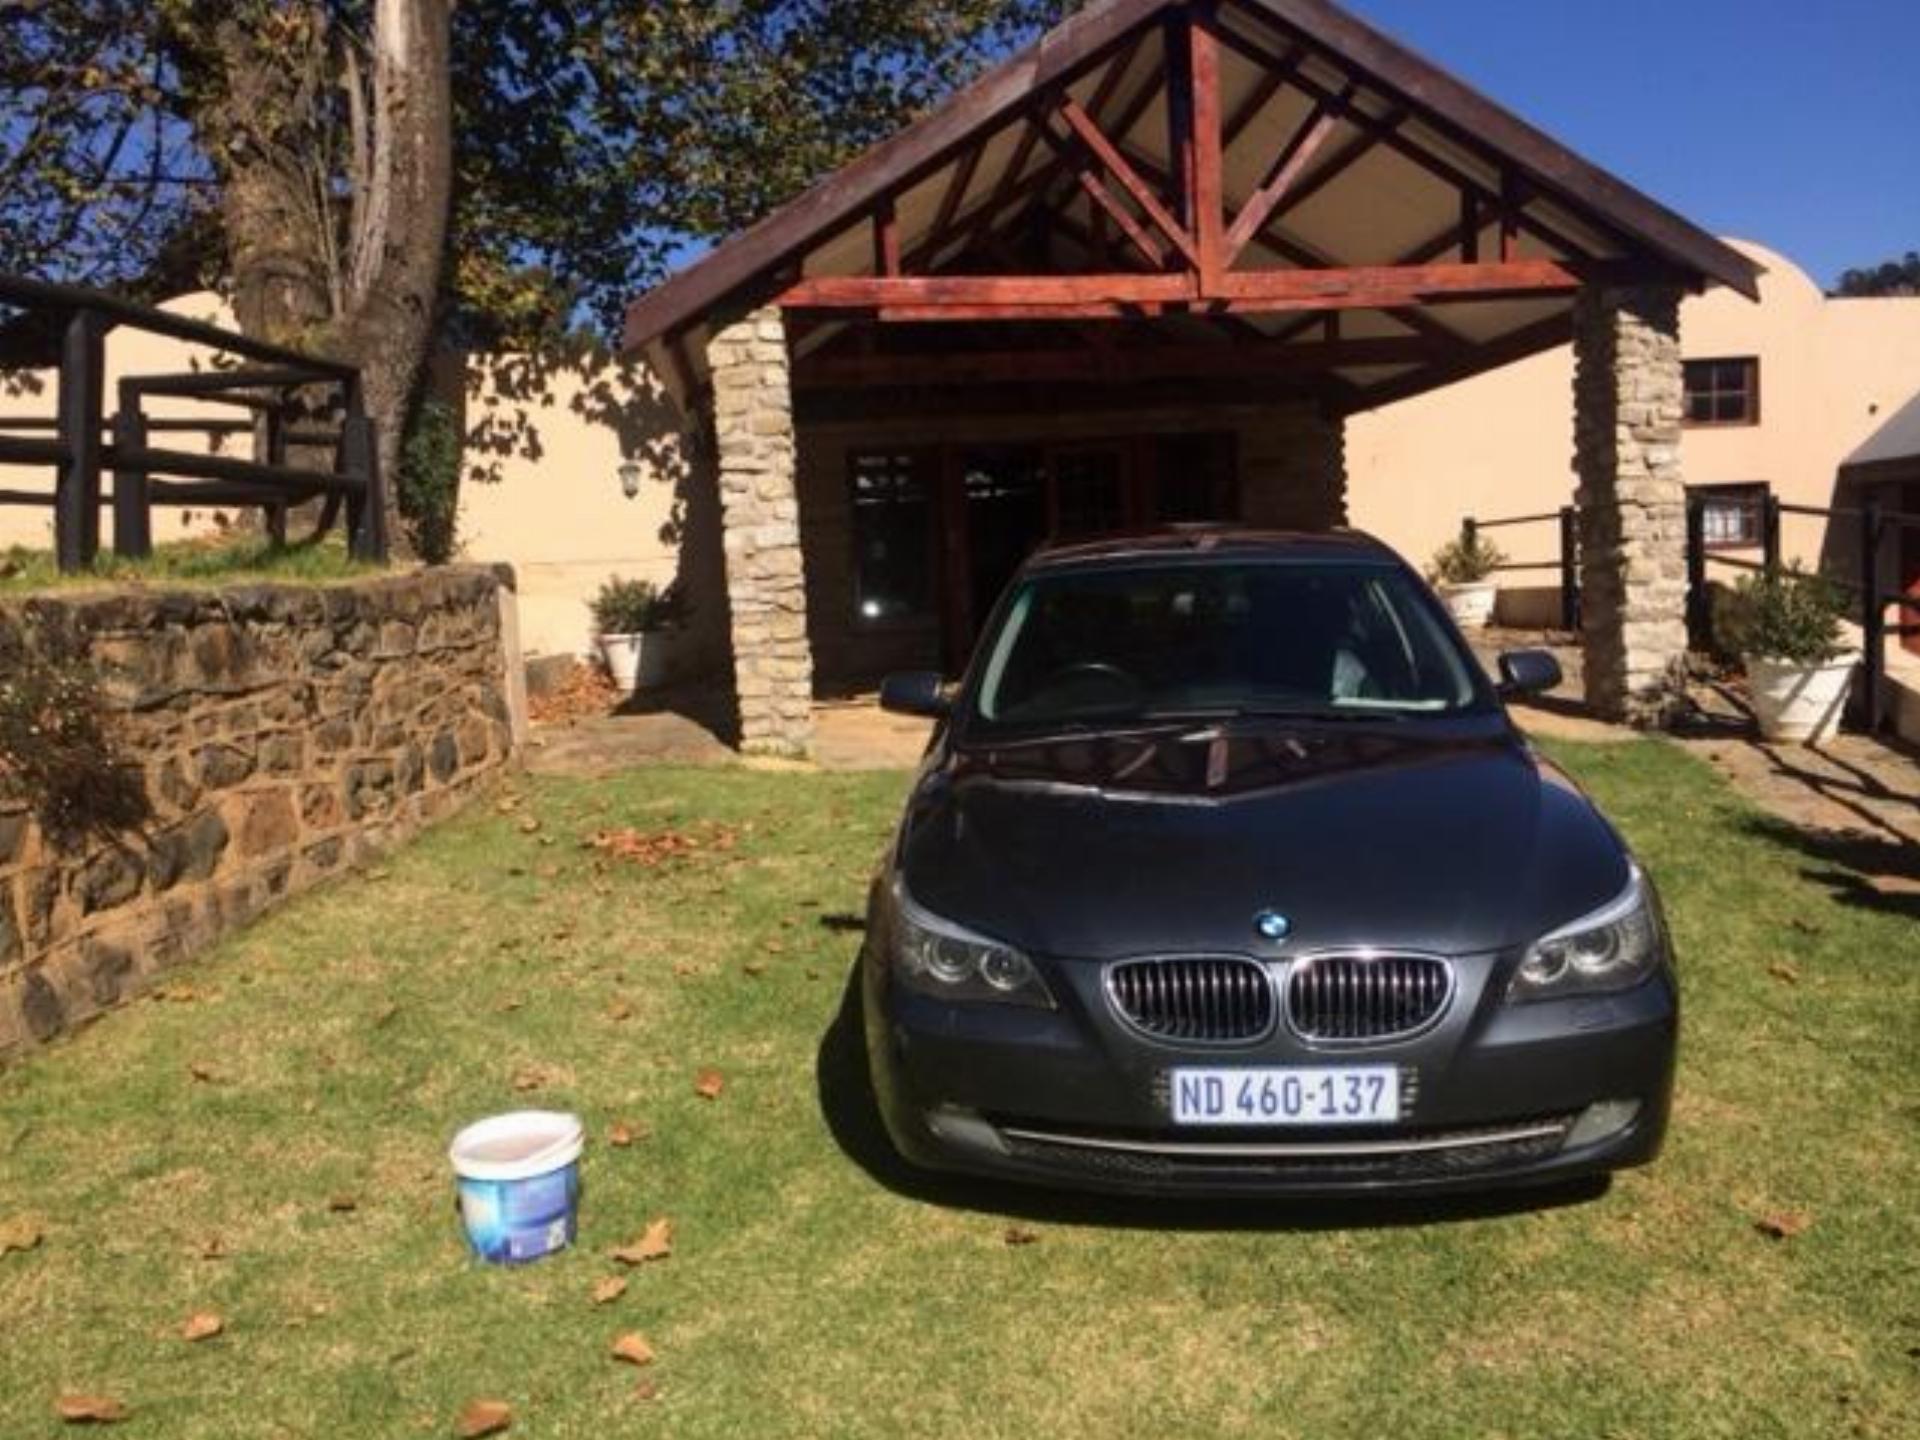 BMW Charcoal 5 Series Full HOUSE, Good Condition